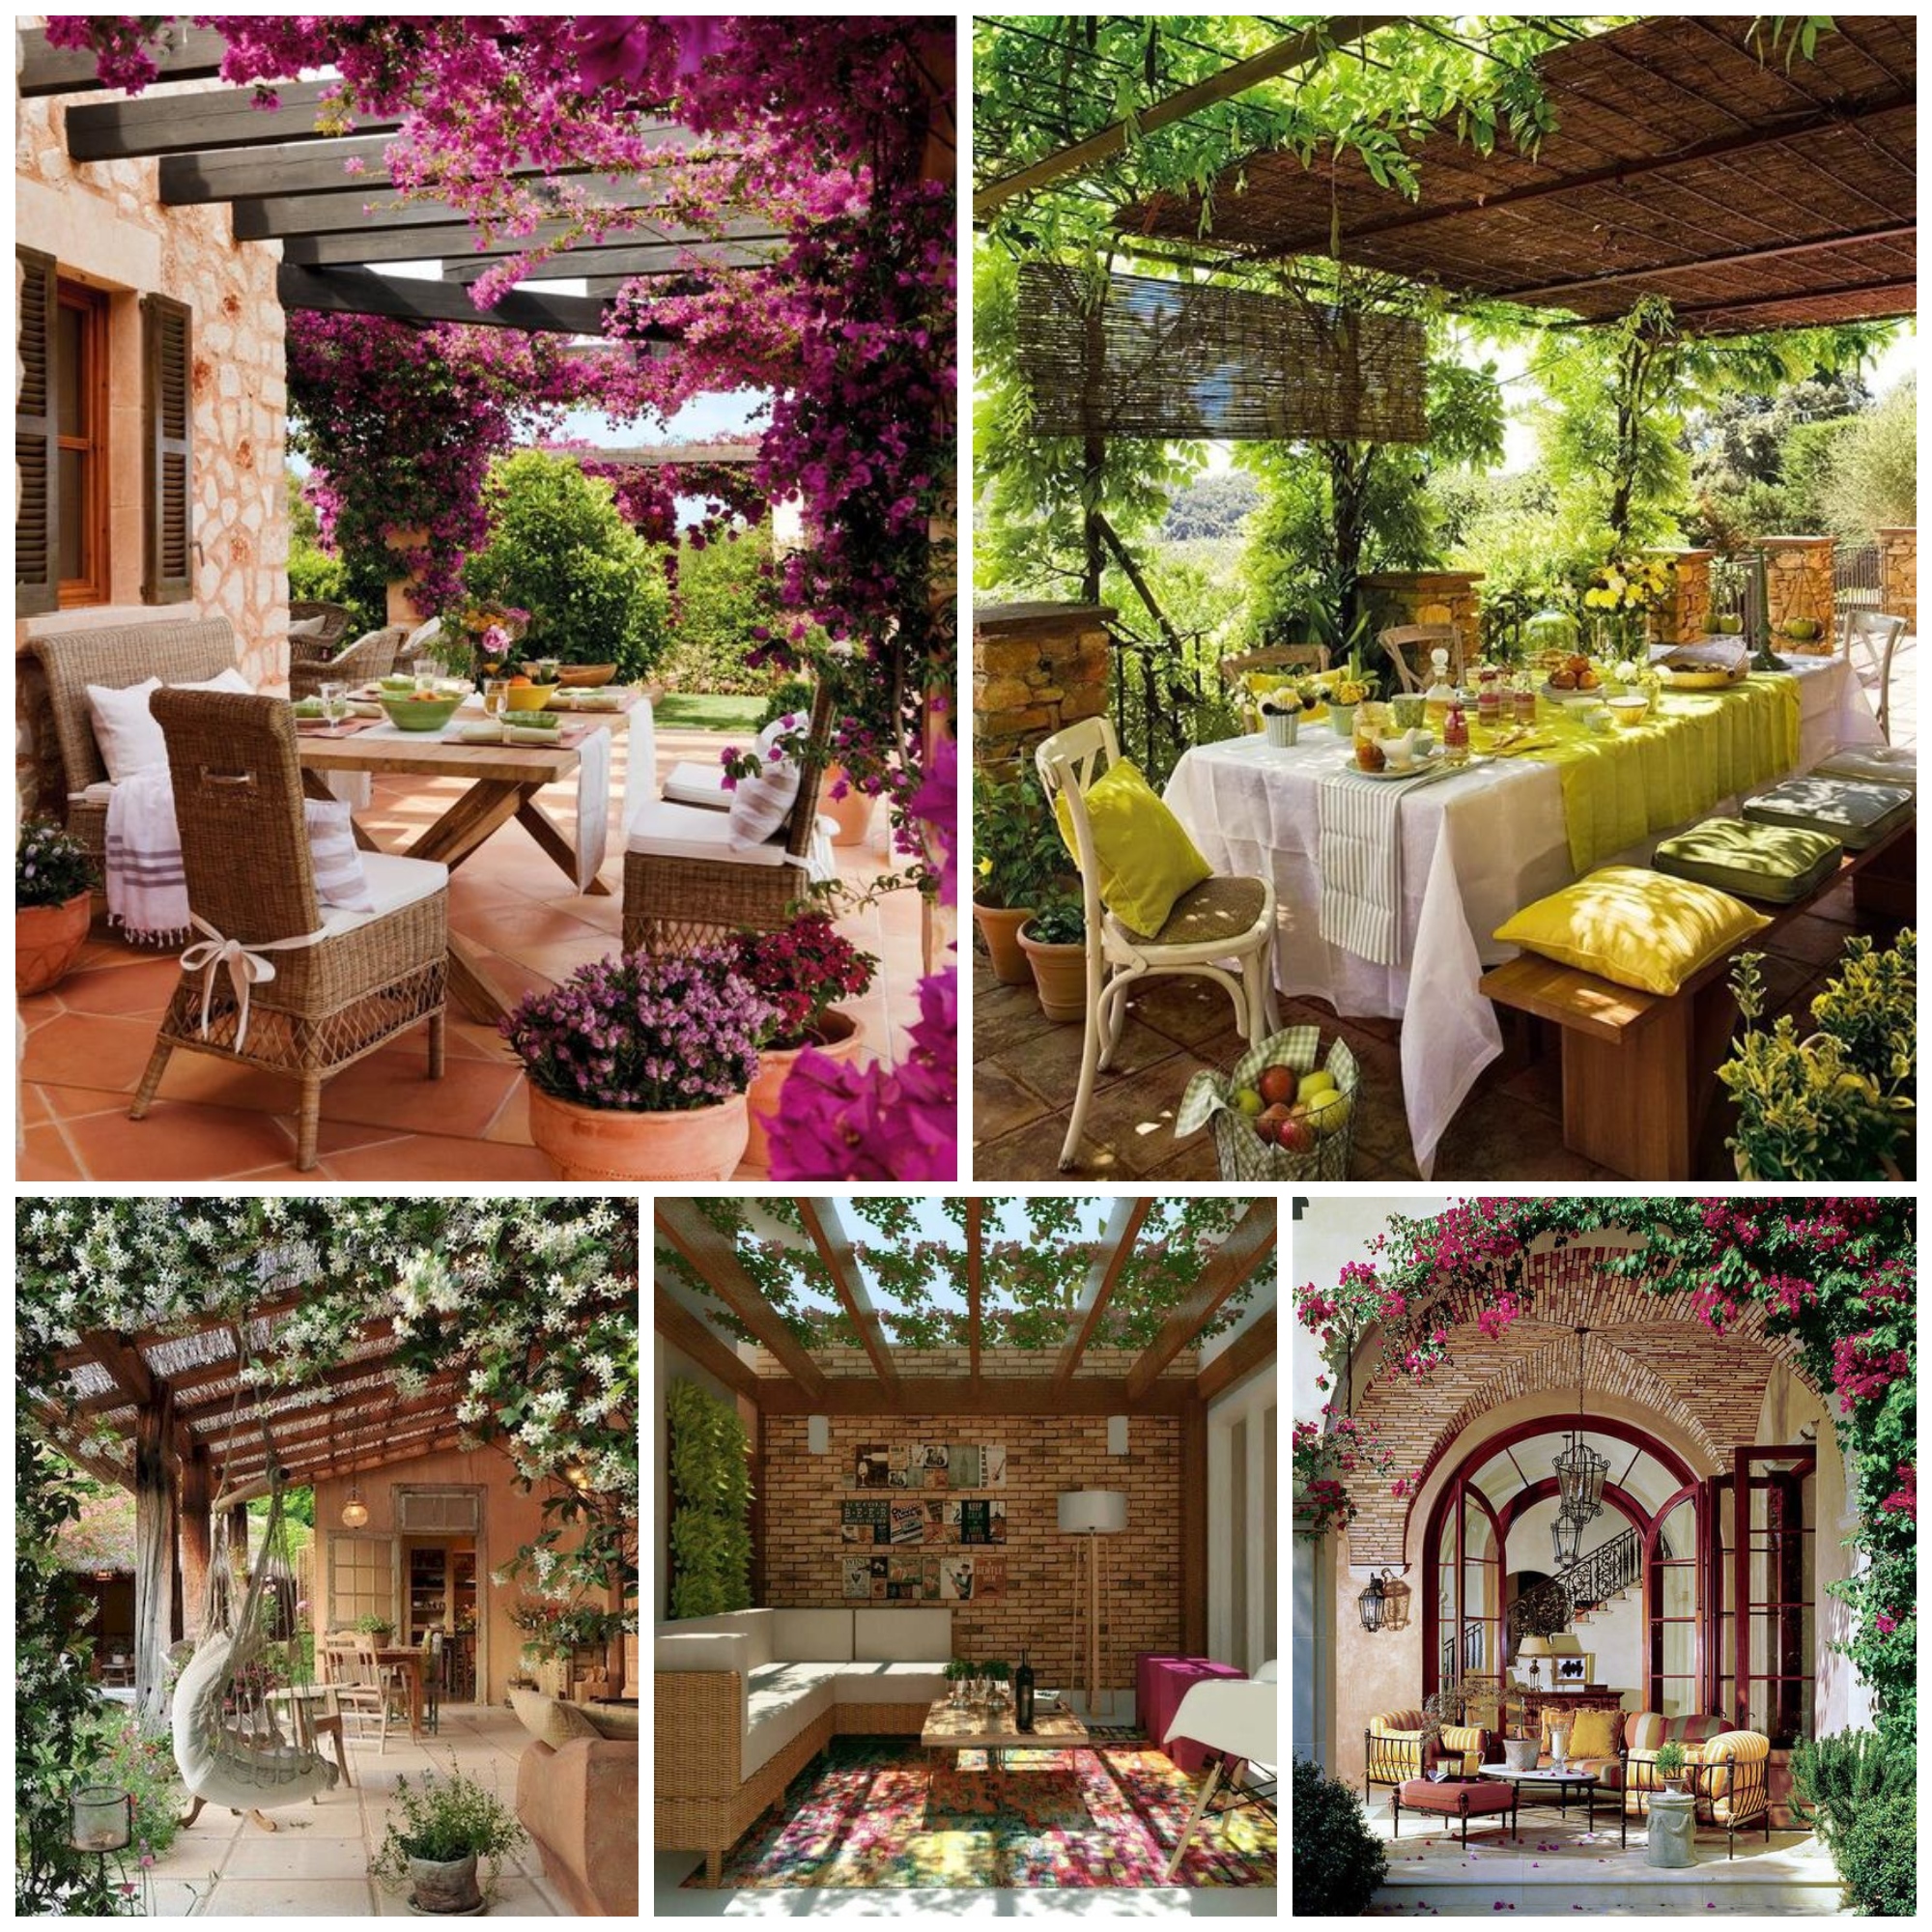 Pergola Ideas That Will Add Shade to Your Backyard